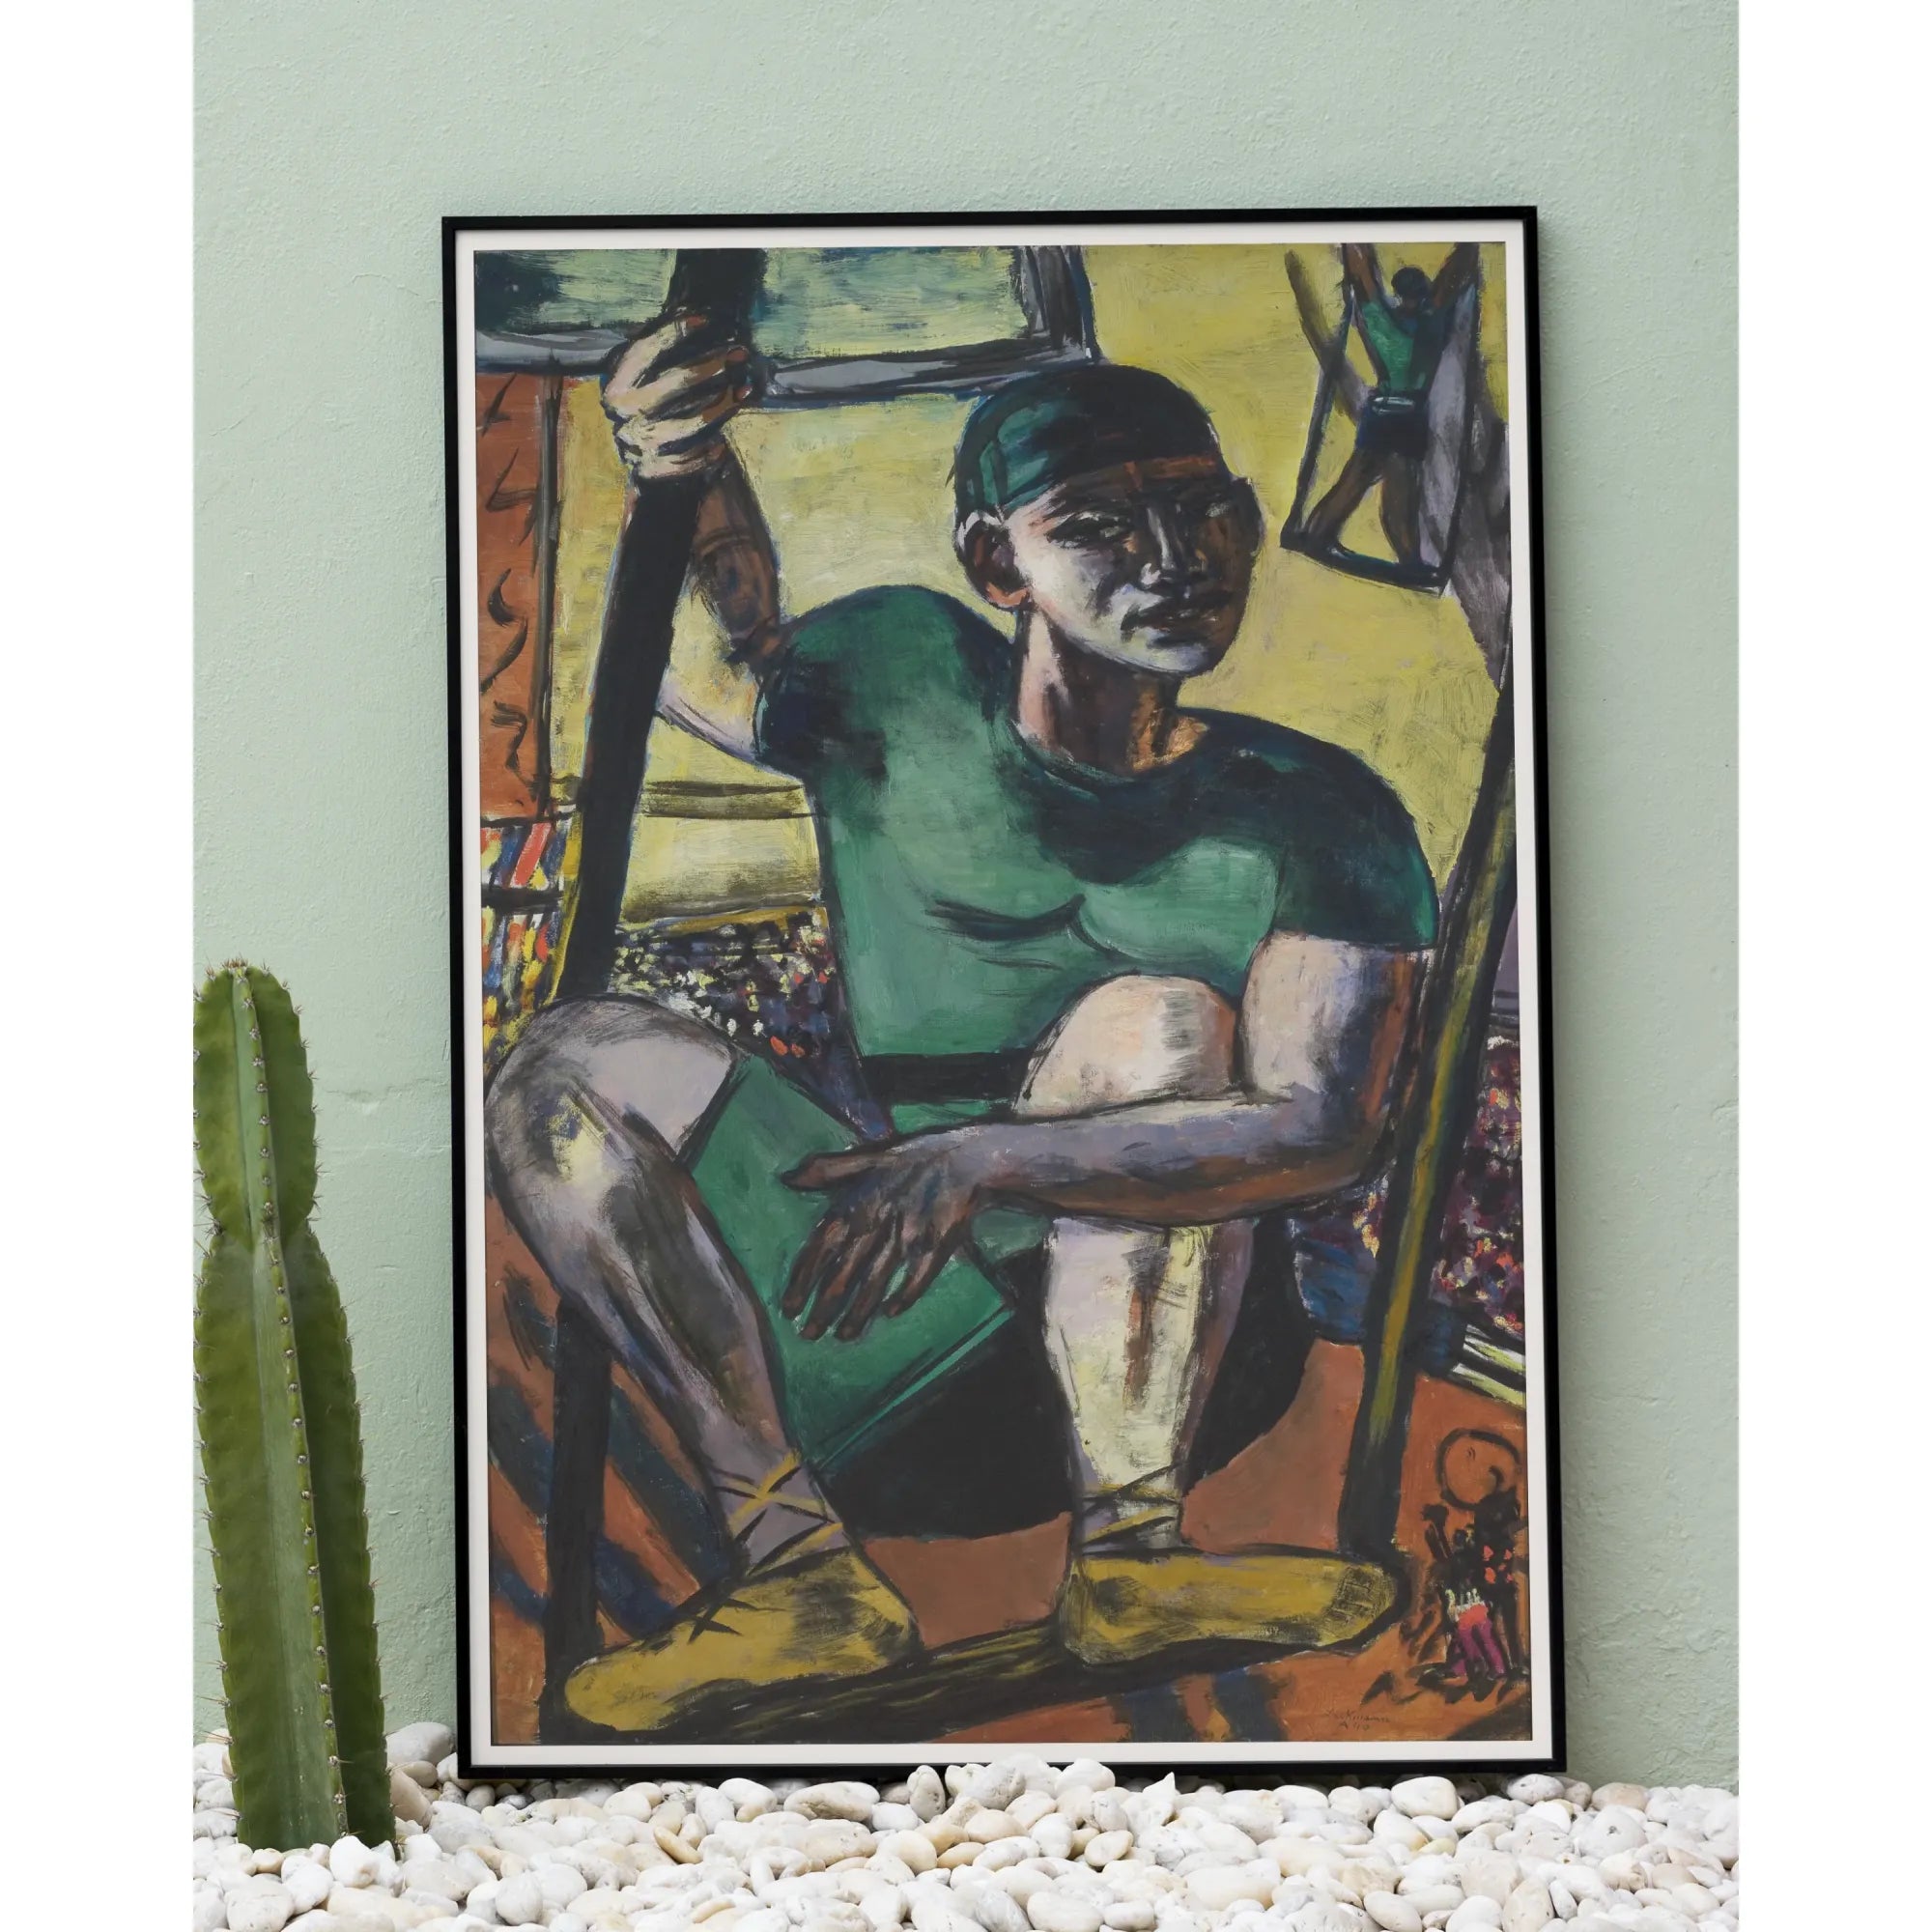 Acrobat On The Trapeze By Max Beckmann Fine Art Print - Posters Prints & Visual Artwork - Aesthetic Art